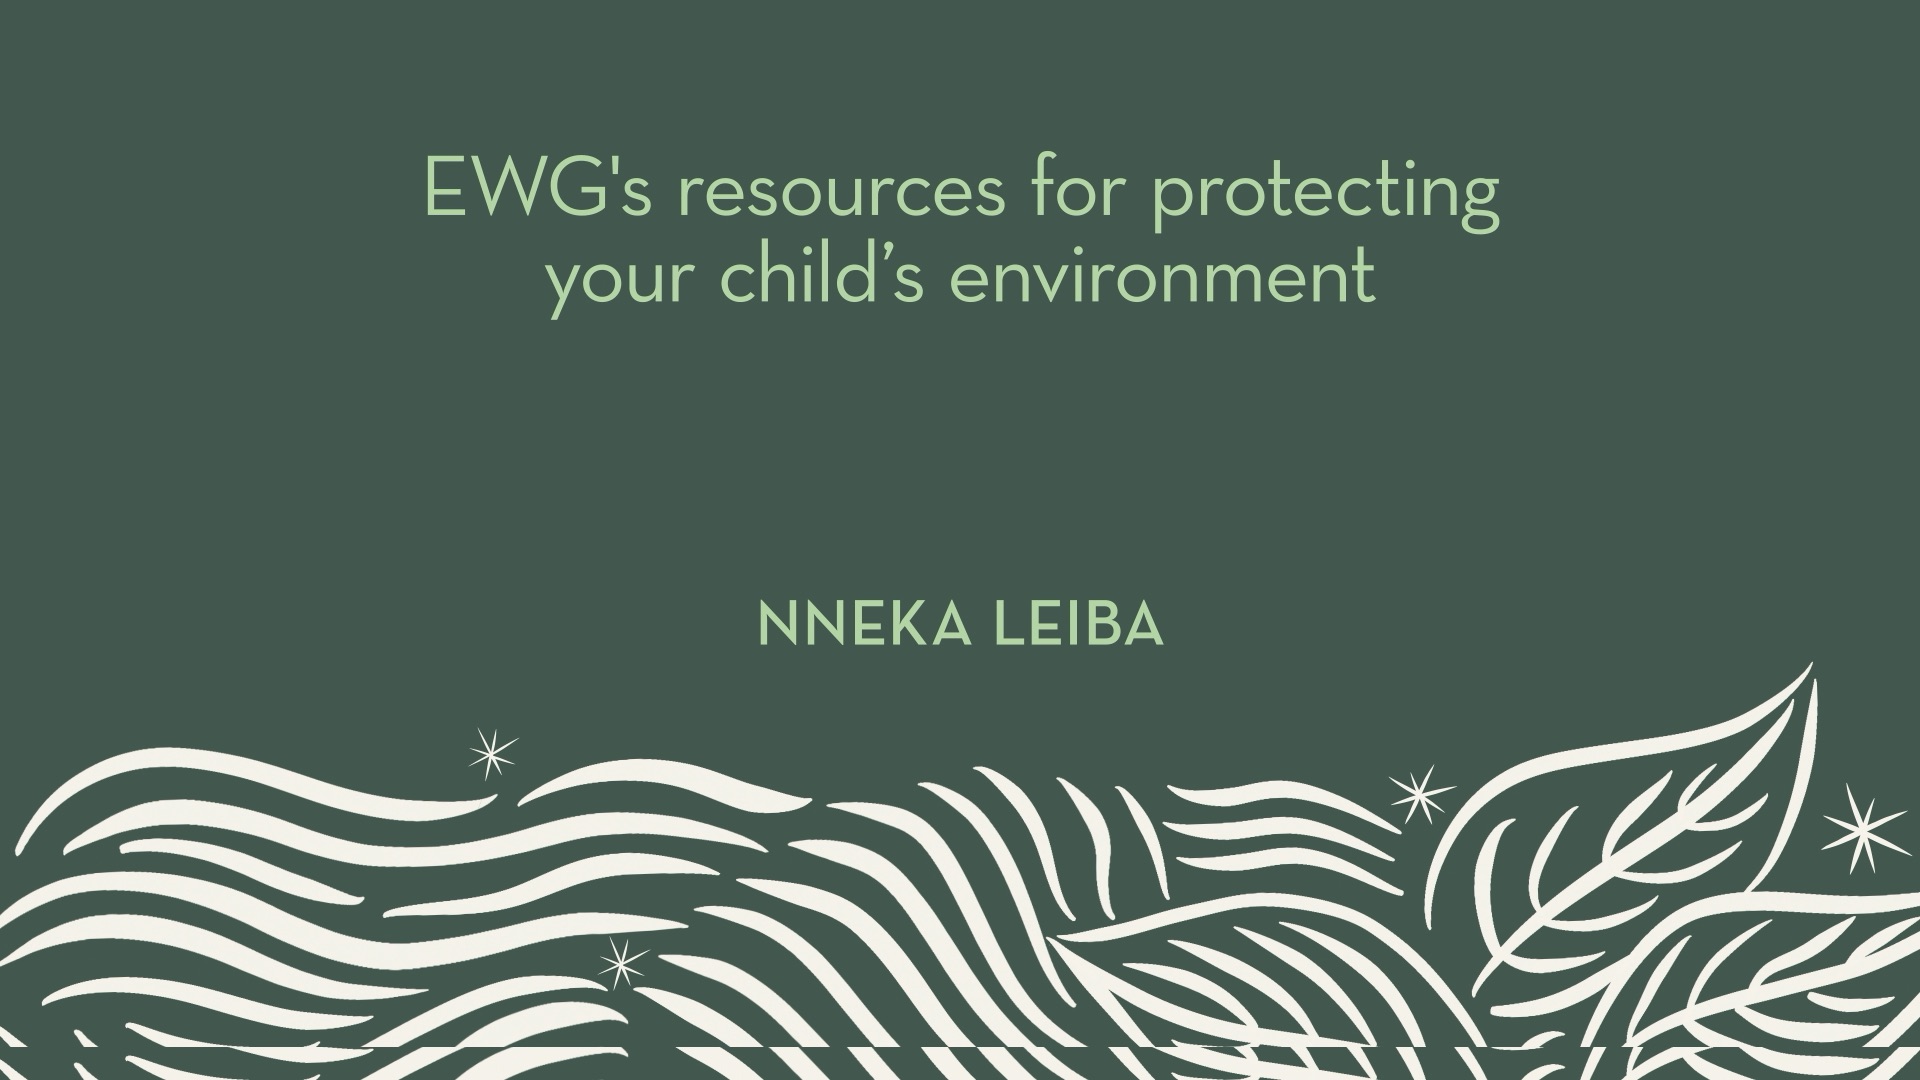 Nneka Leiba | EWG's resources for protecting your child's environment